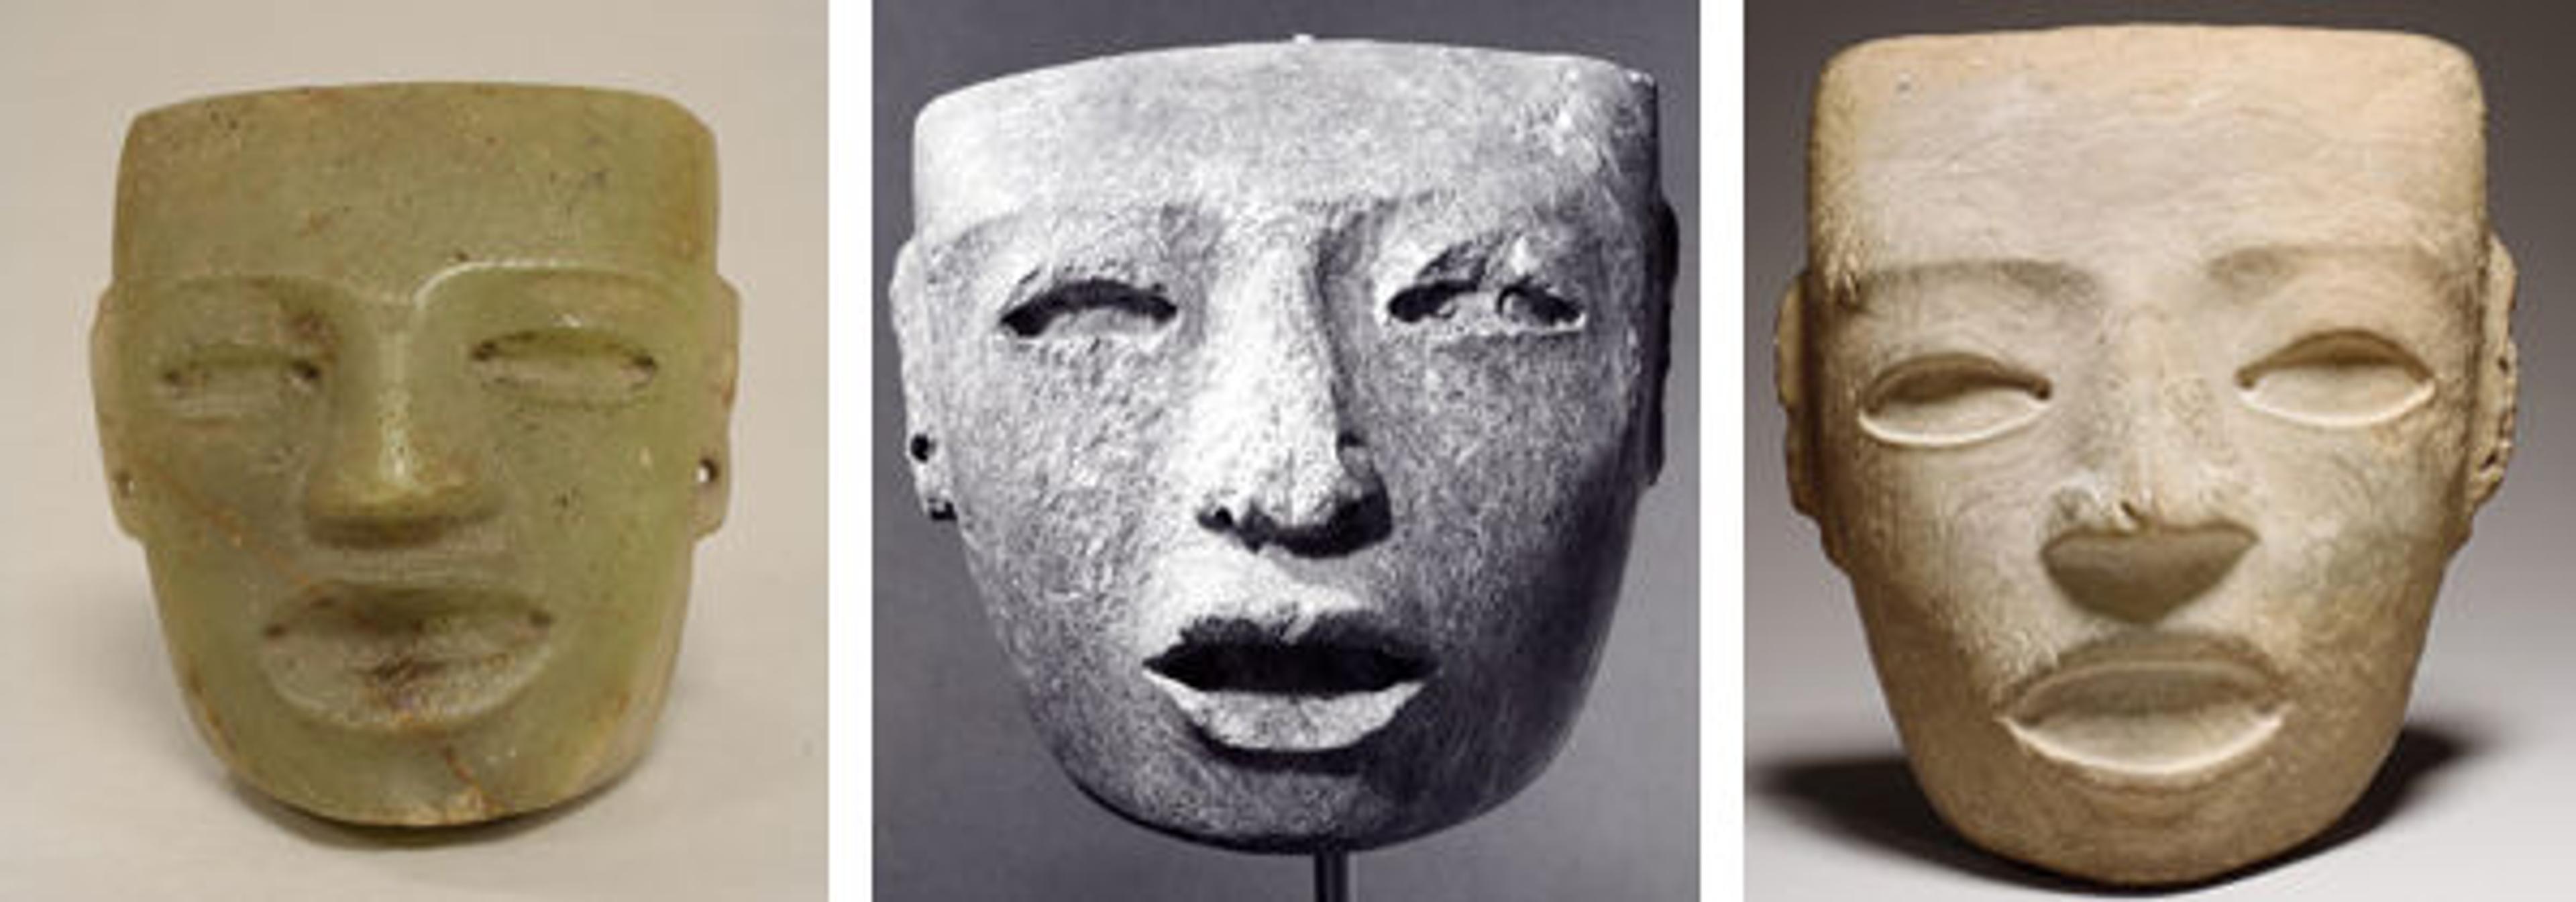 Left: Mask, 4th–8th century | Teotihuacan, Mexico, Mesoamerica | 00.5.1437 | Center: Mask, 3rd–7th century | Teotihuacan, Mexico, Mesoamerica | 1979.206.527 | Right: Mask, 3rd–7th century. Teotihuacan, Mexico, Mesoamerica | 1978.412.198